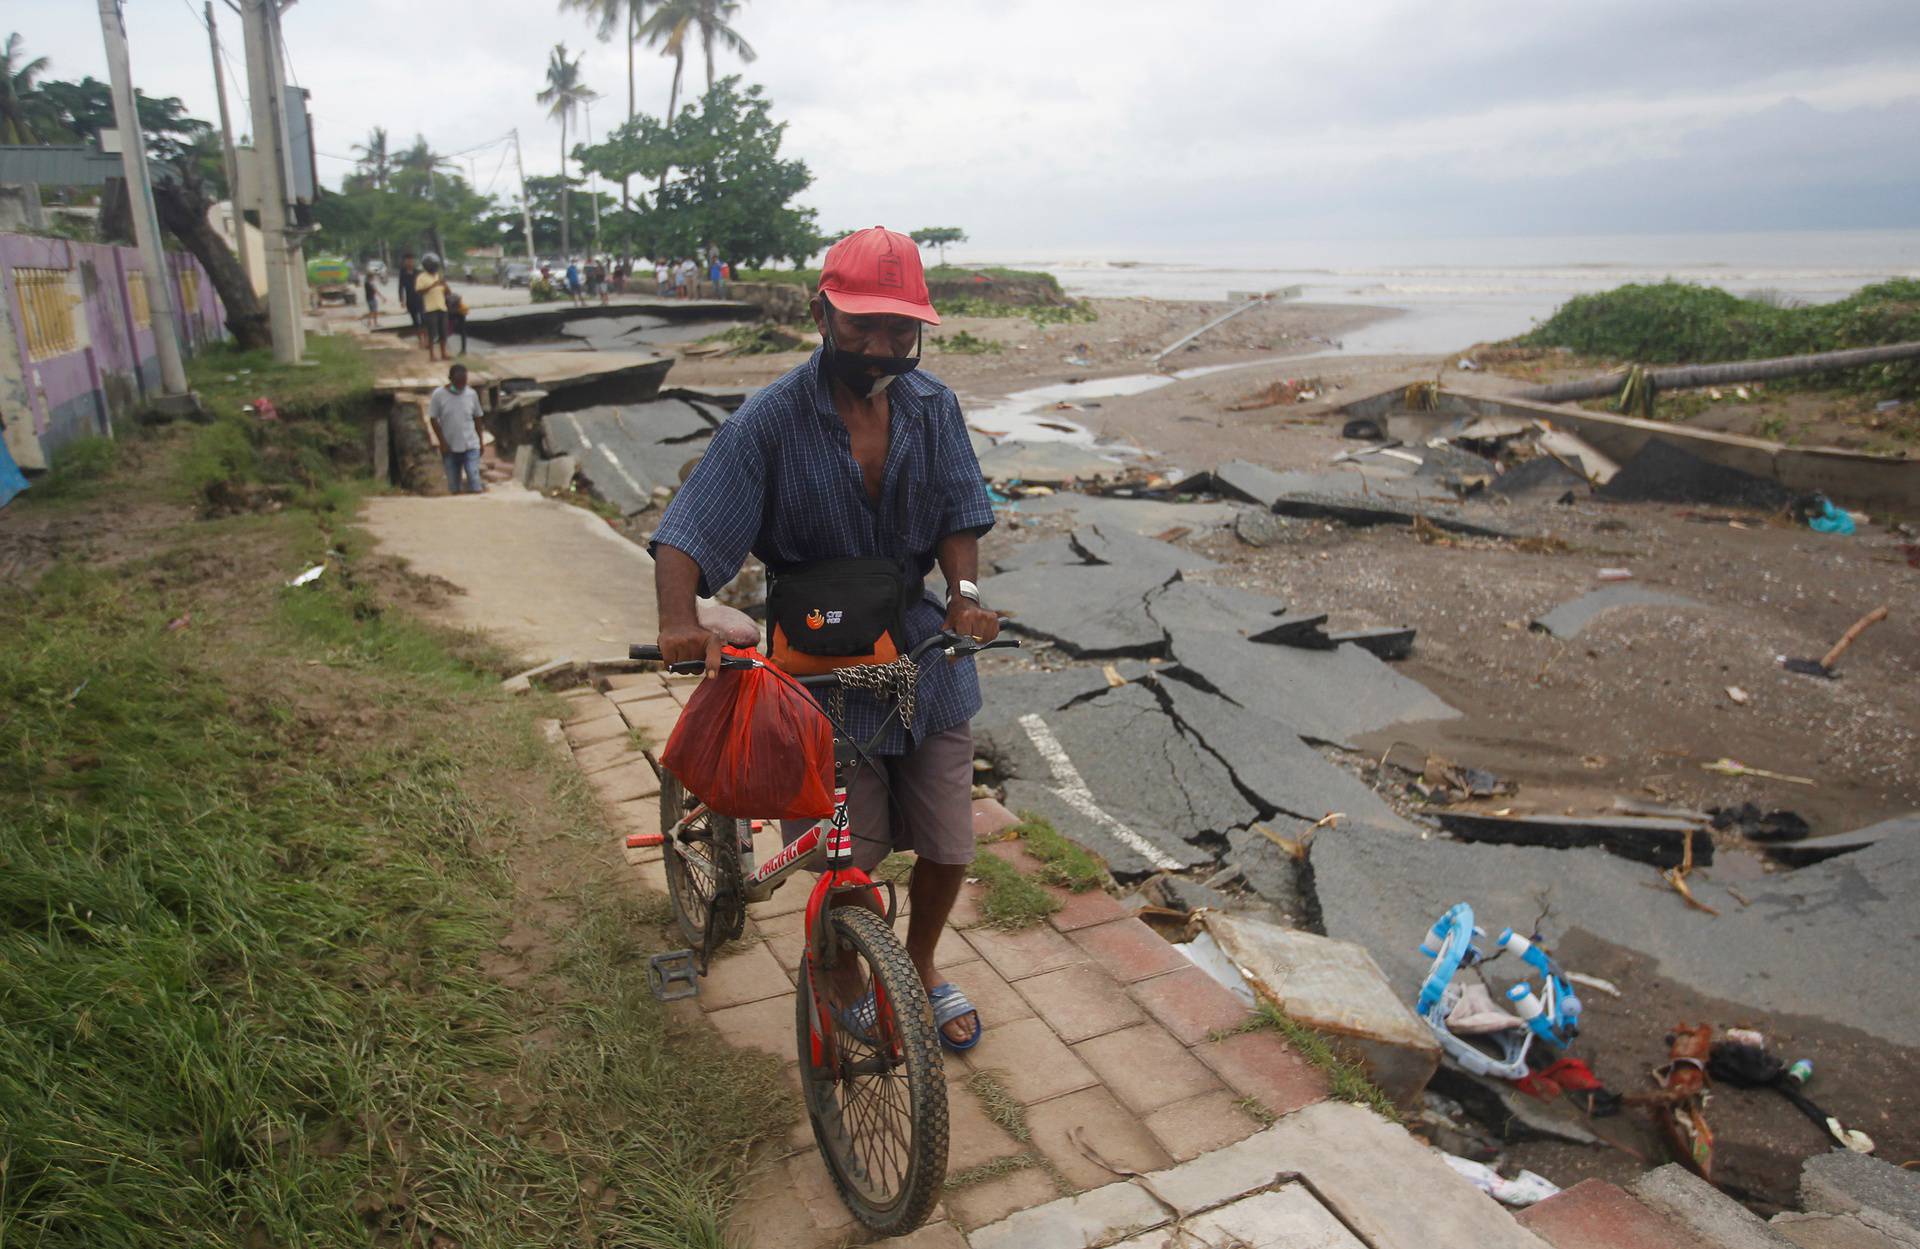 A man wheels his bicycle through roads damaged by floods after heavy rains in Dili